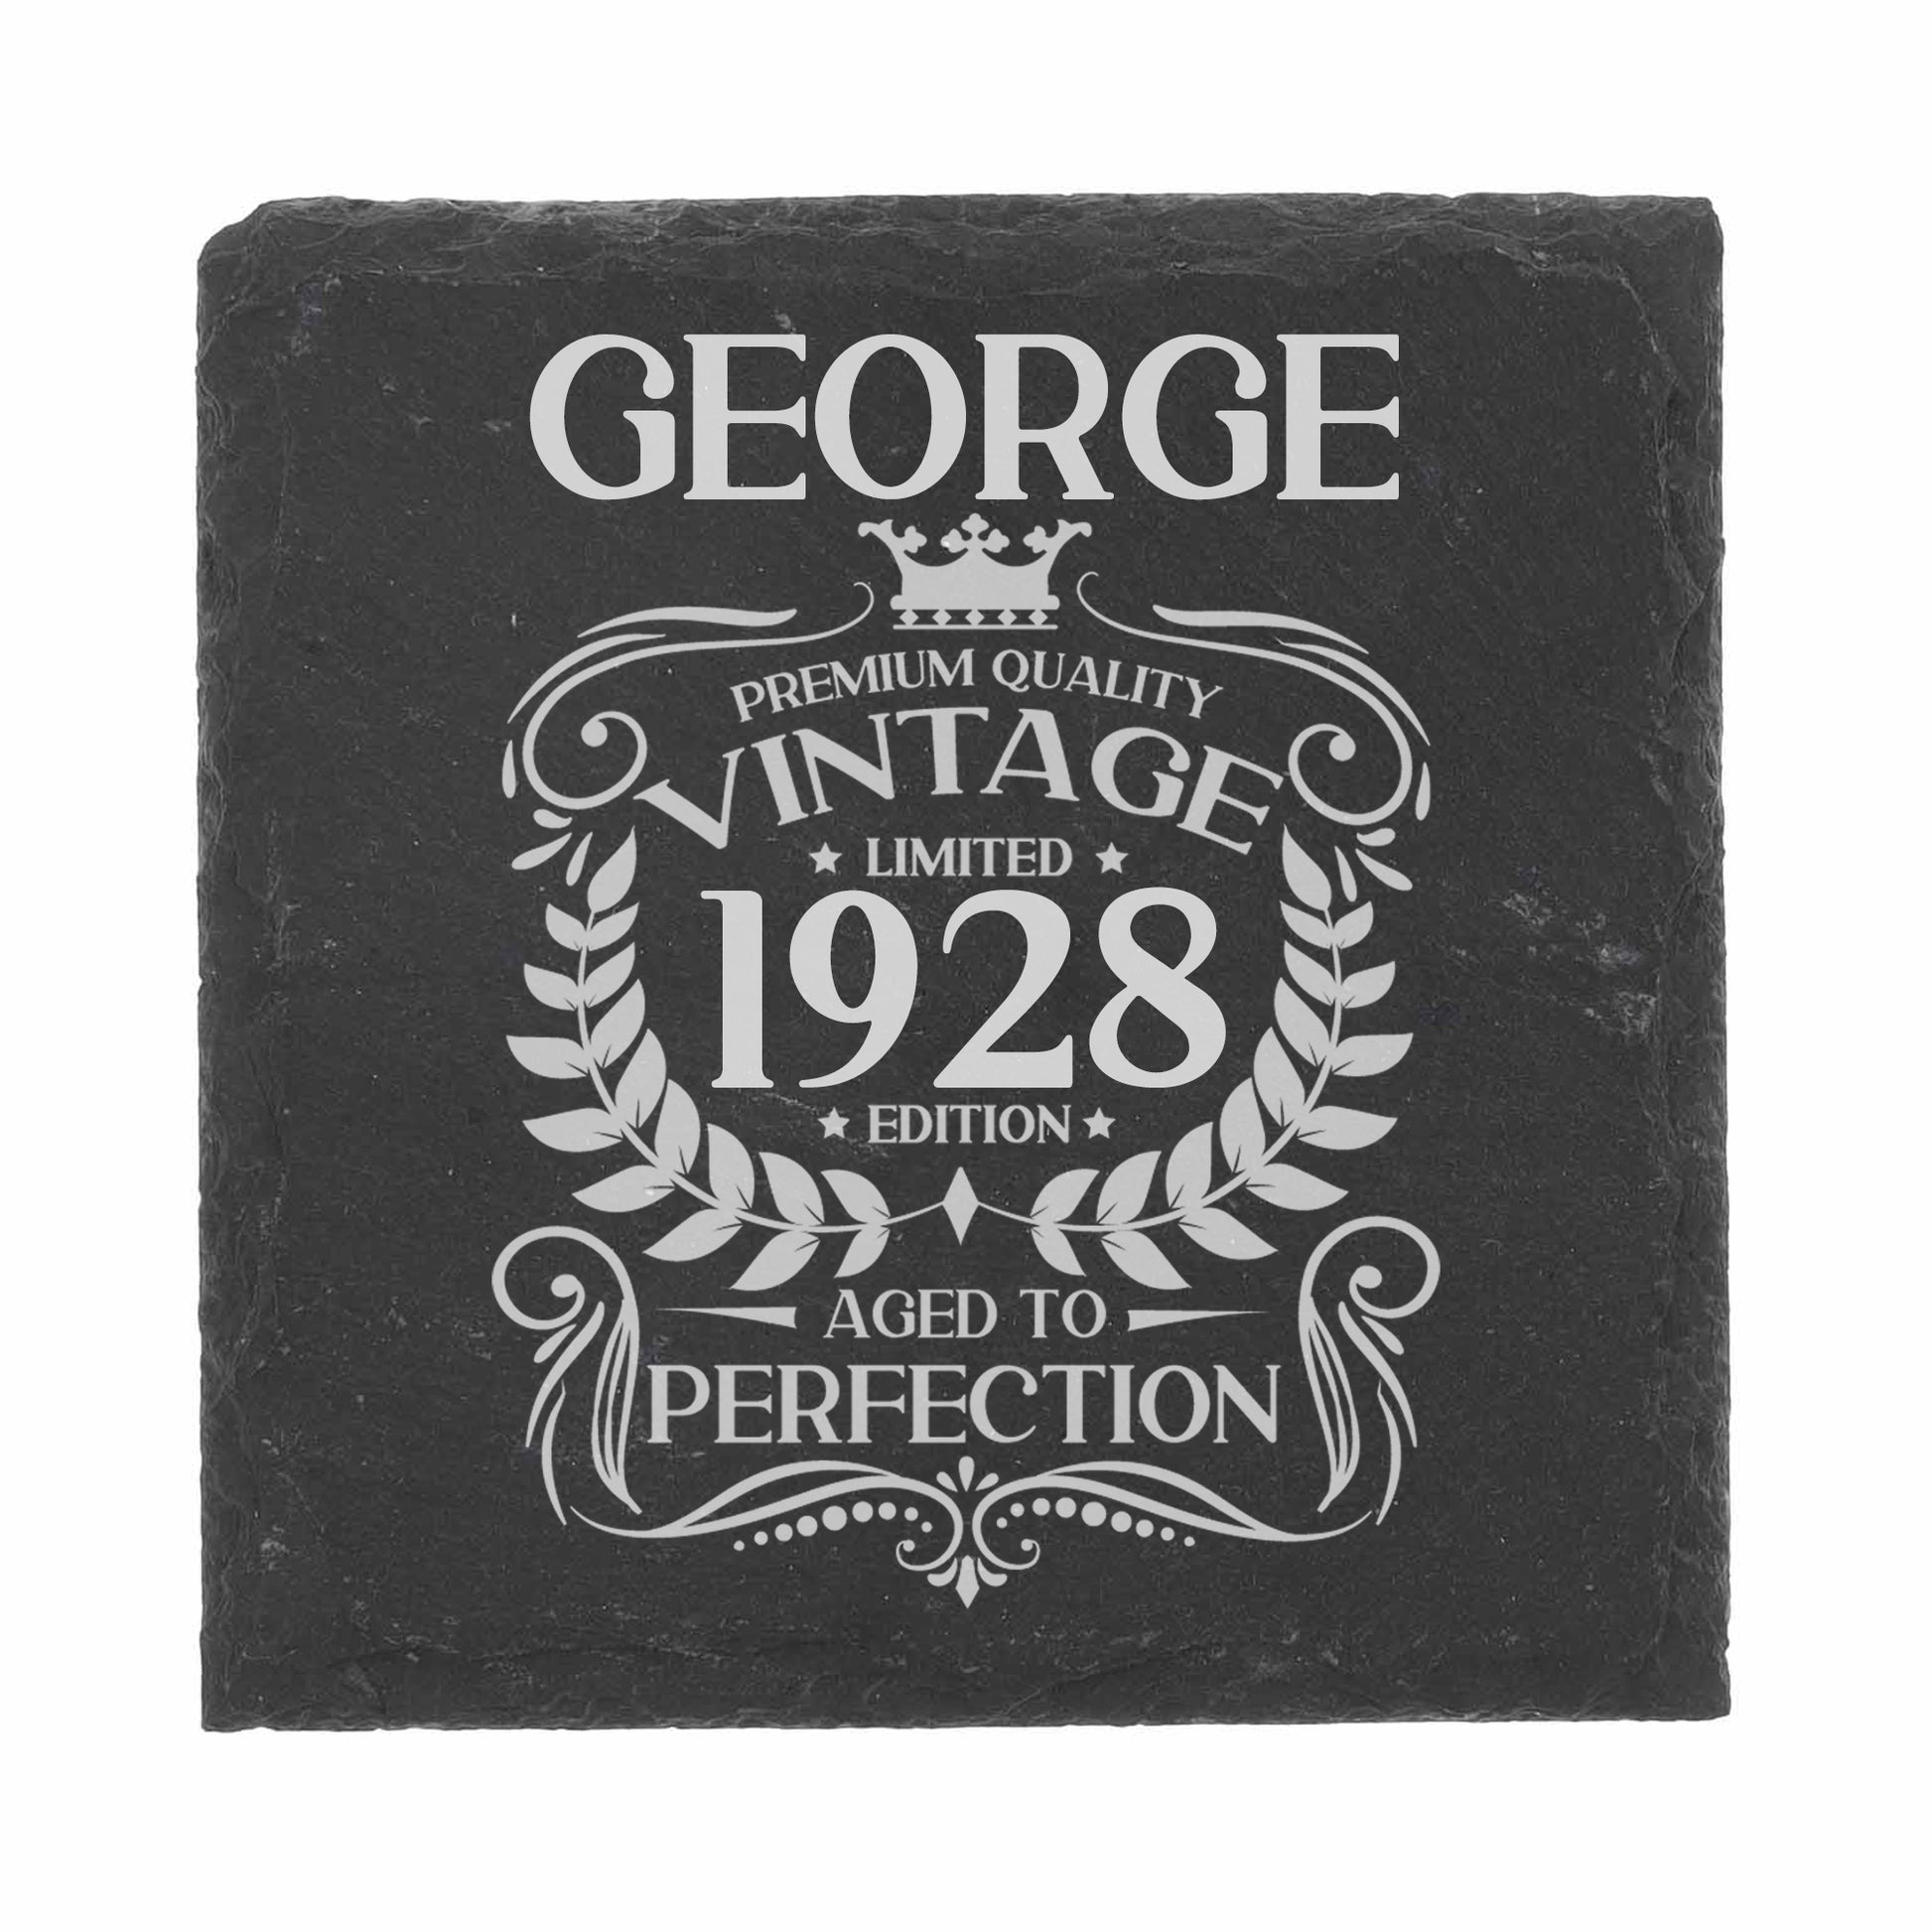 Personalised Vintage 1928 Mug and/or Coaster  - Always Looking Good - Square Coaster On Its Own  